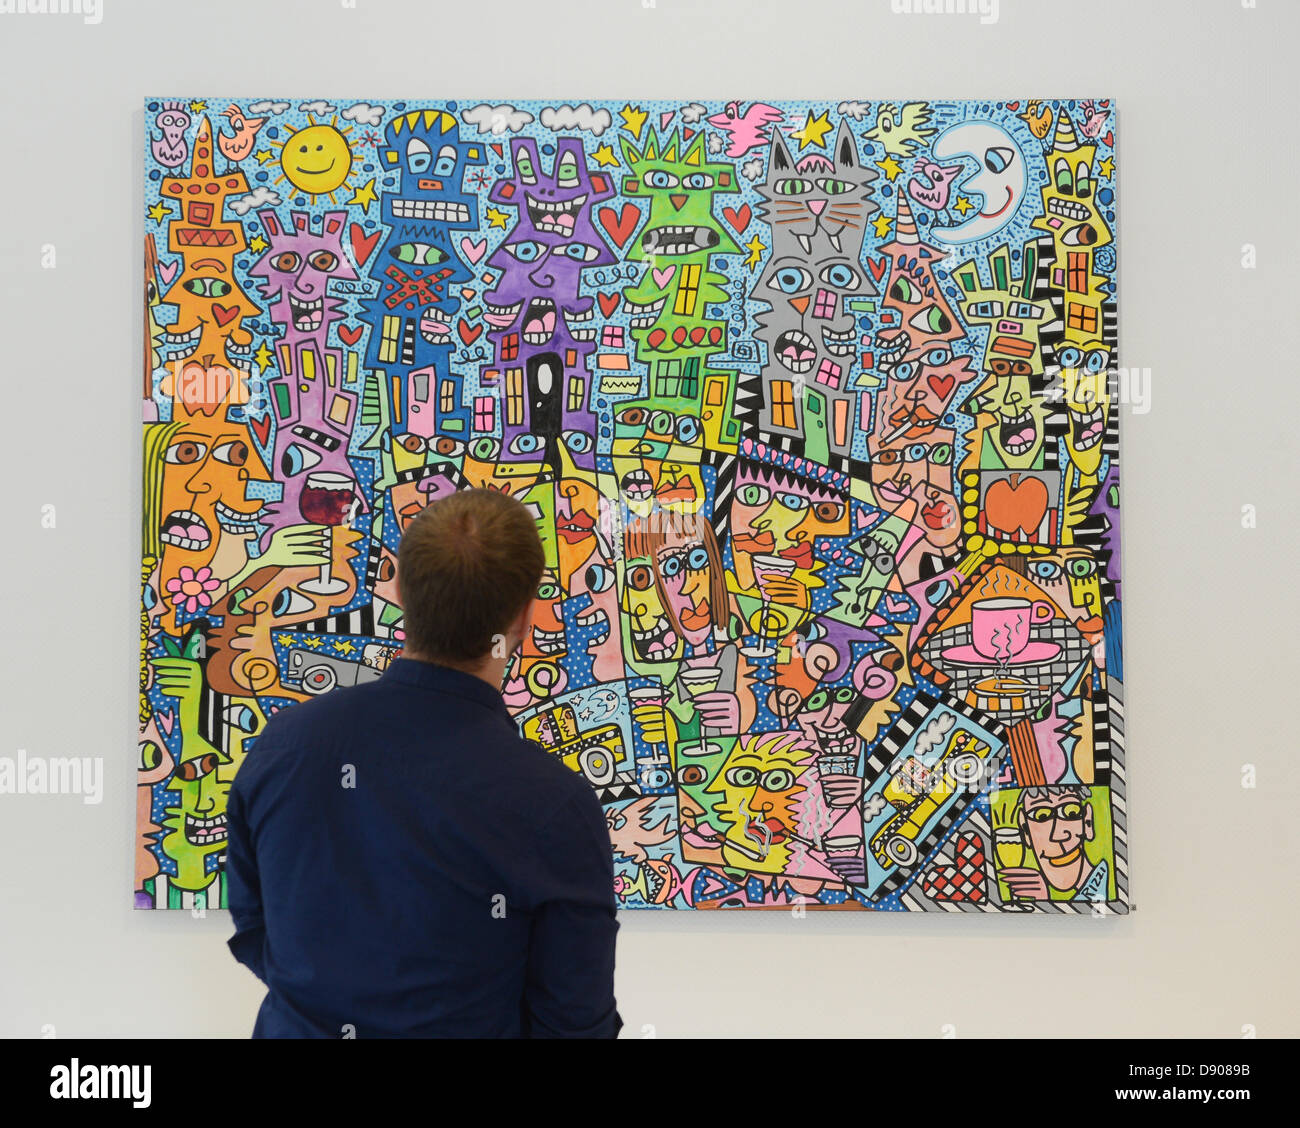 A visitor looks at a painting by artist James Rizzi in Esslingen am Neckar,  Germany, 07 June 2013. One and a half years after the death of popart  artist Rizzi, a retrospective